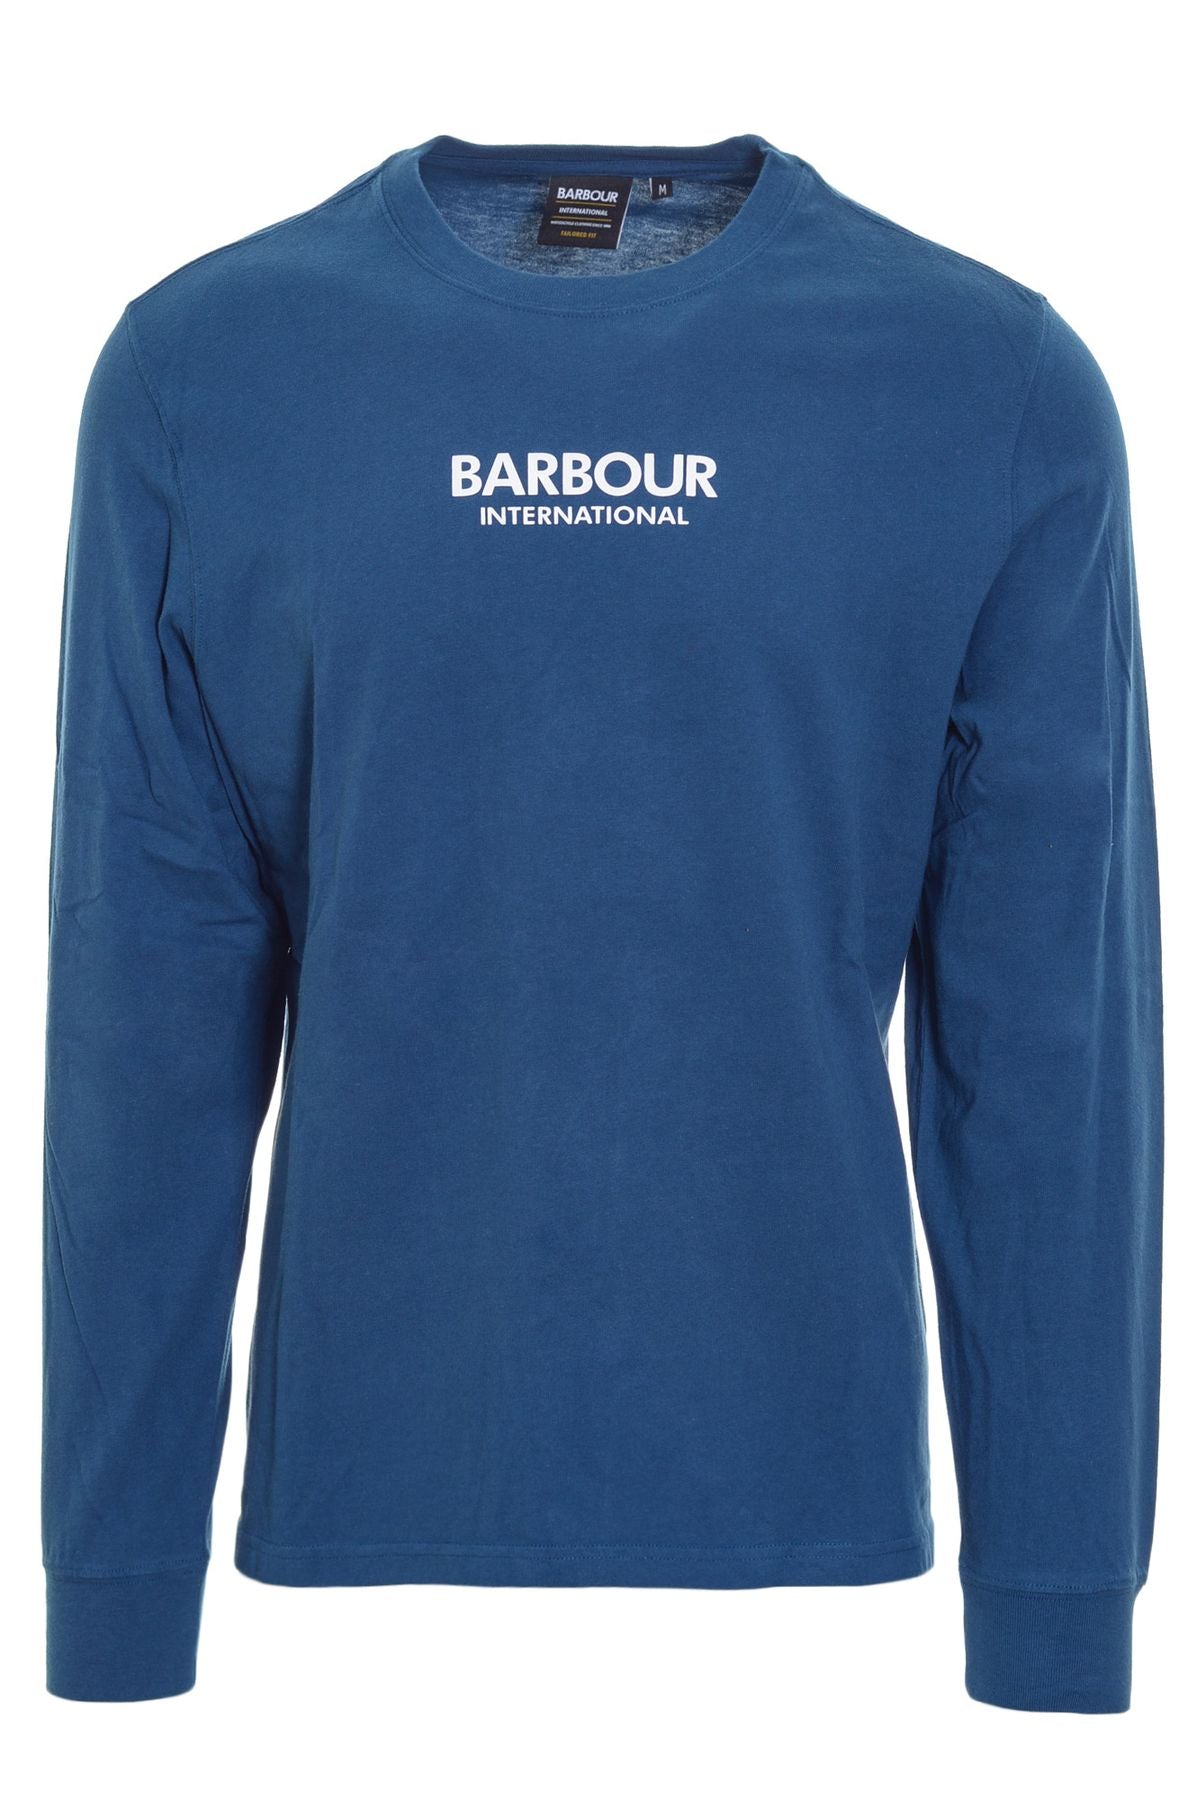 BARBOUR T-shirt Autunno/Inverno mts1078bl81